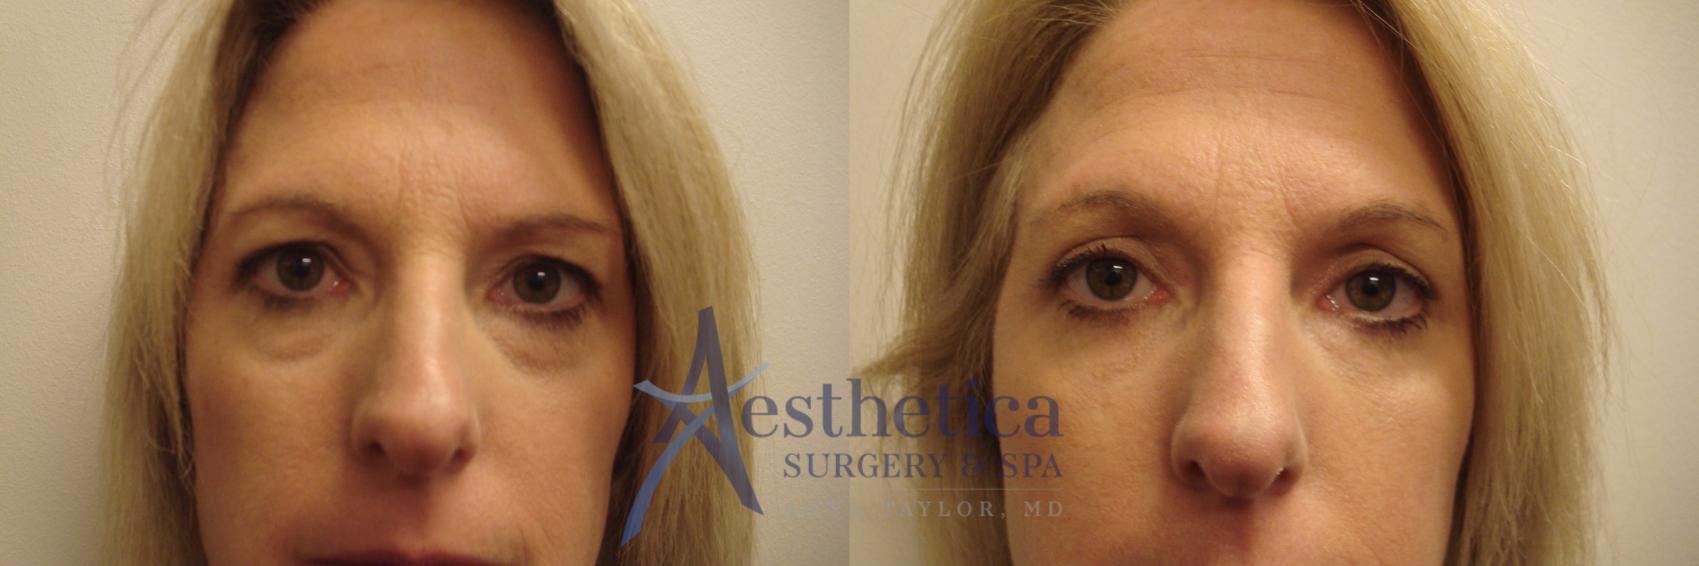 Blepharoplasty (Eyelid Surgery) Case 654 Before & After Front | Columbus, OH | Aesthetica Surgery & Spa